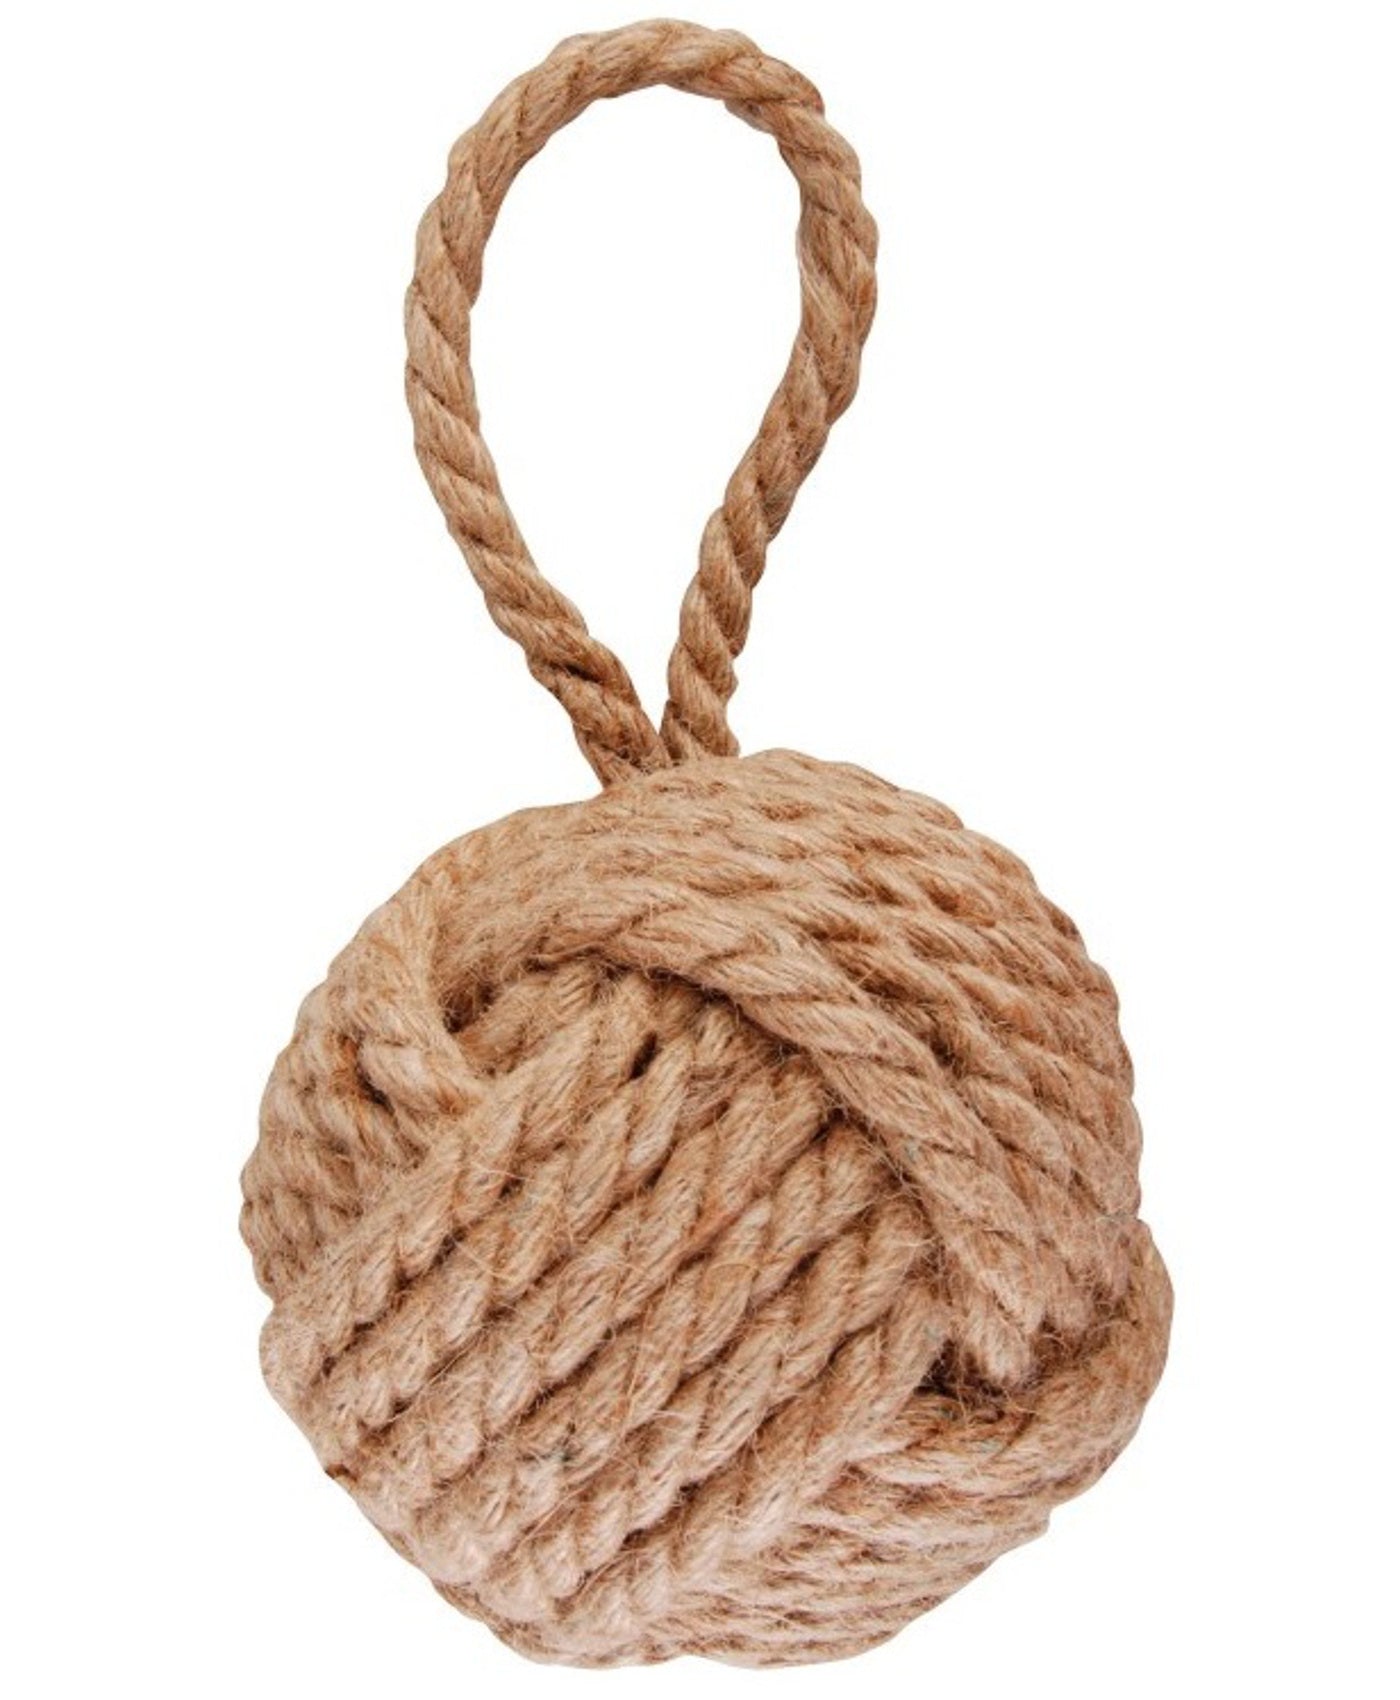 Heavy Duty Rope Knot Doorstop with Handle (Cube or Sphere